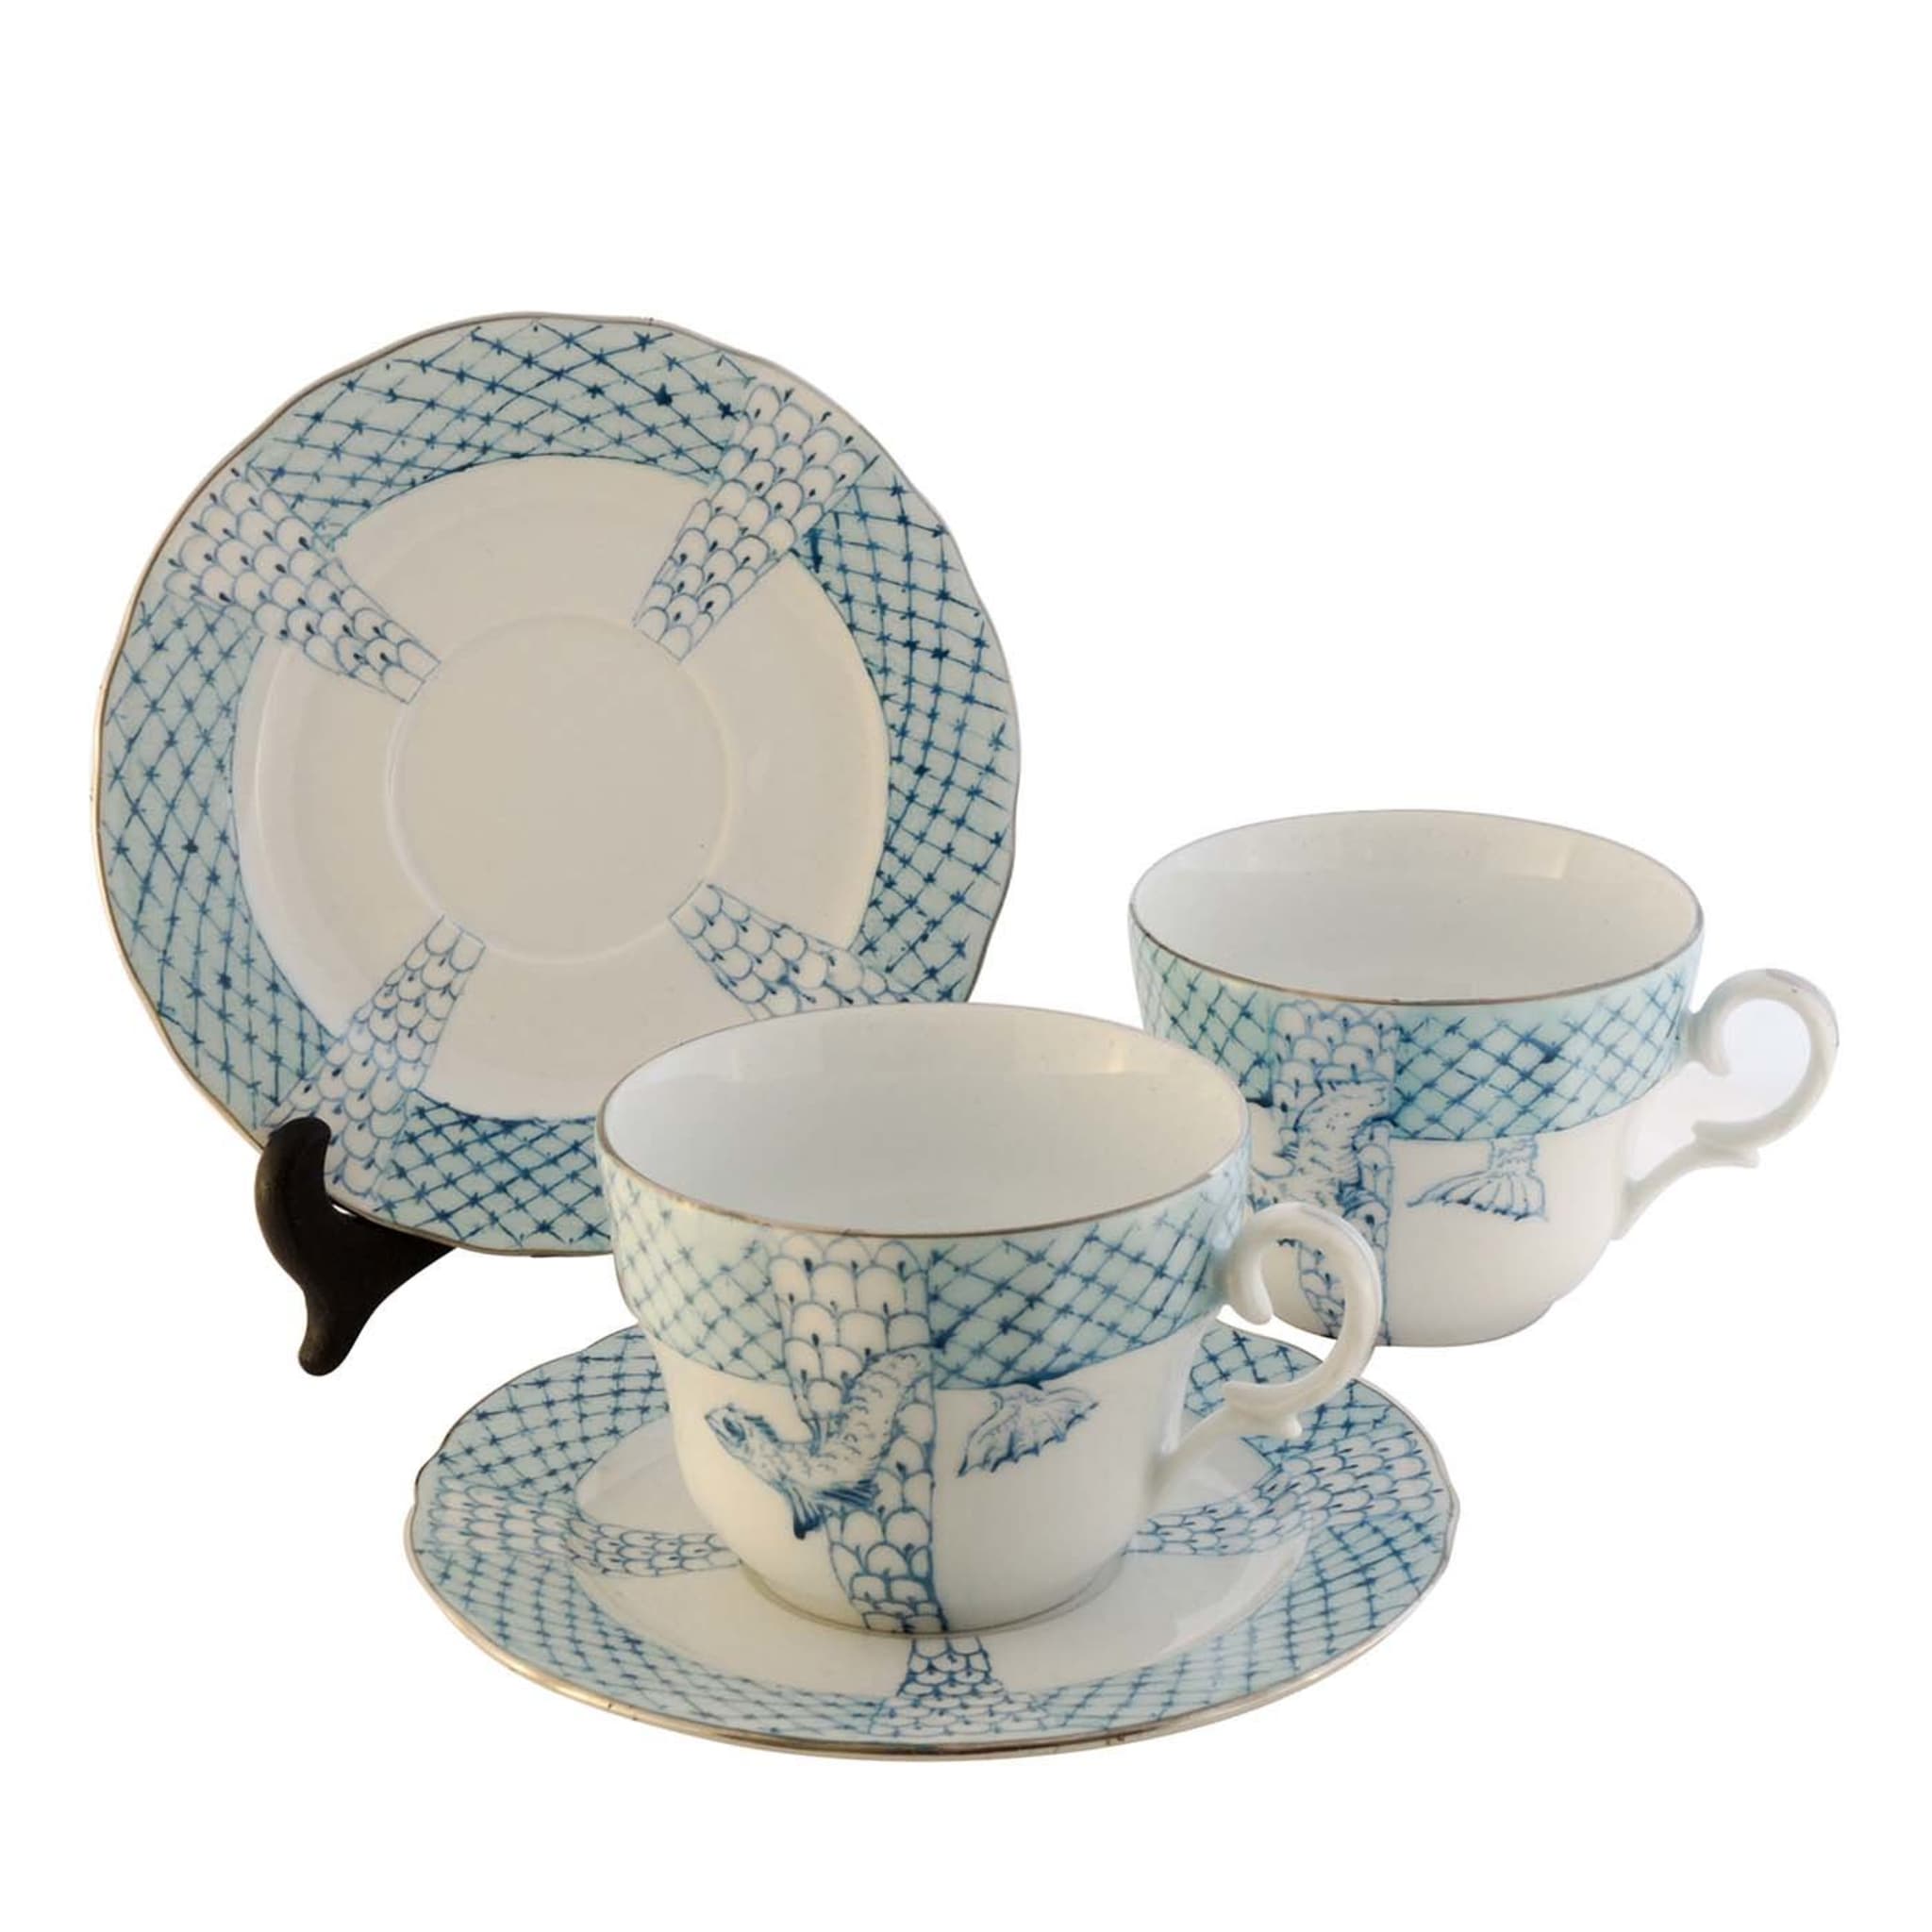 Turquoise Dragon 2 Cups and Saucer Set - Main view